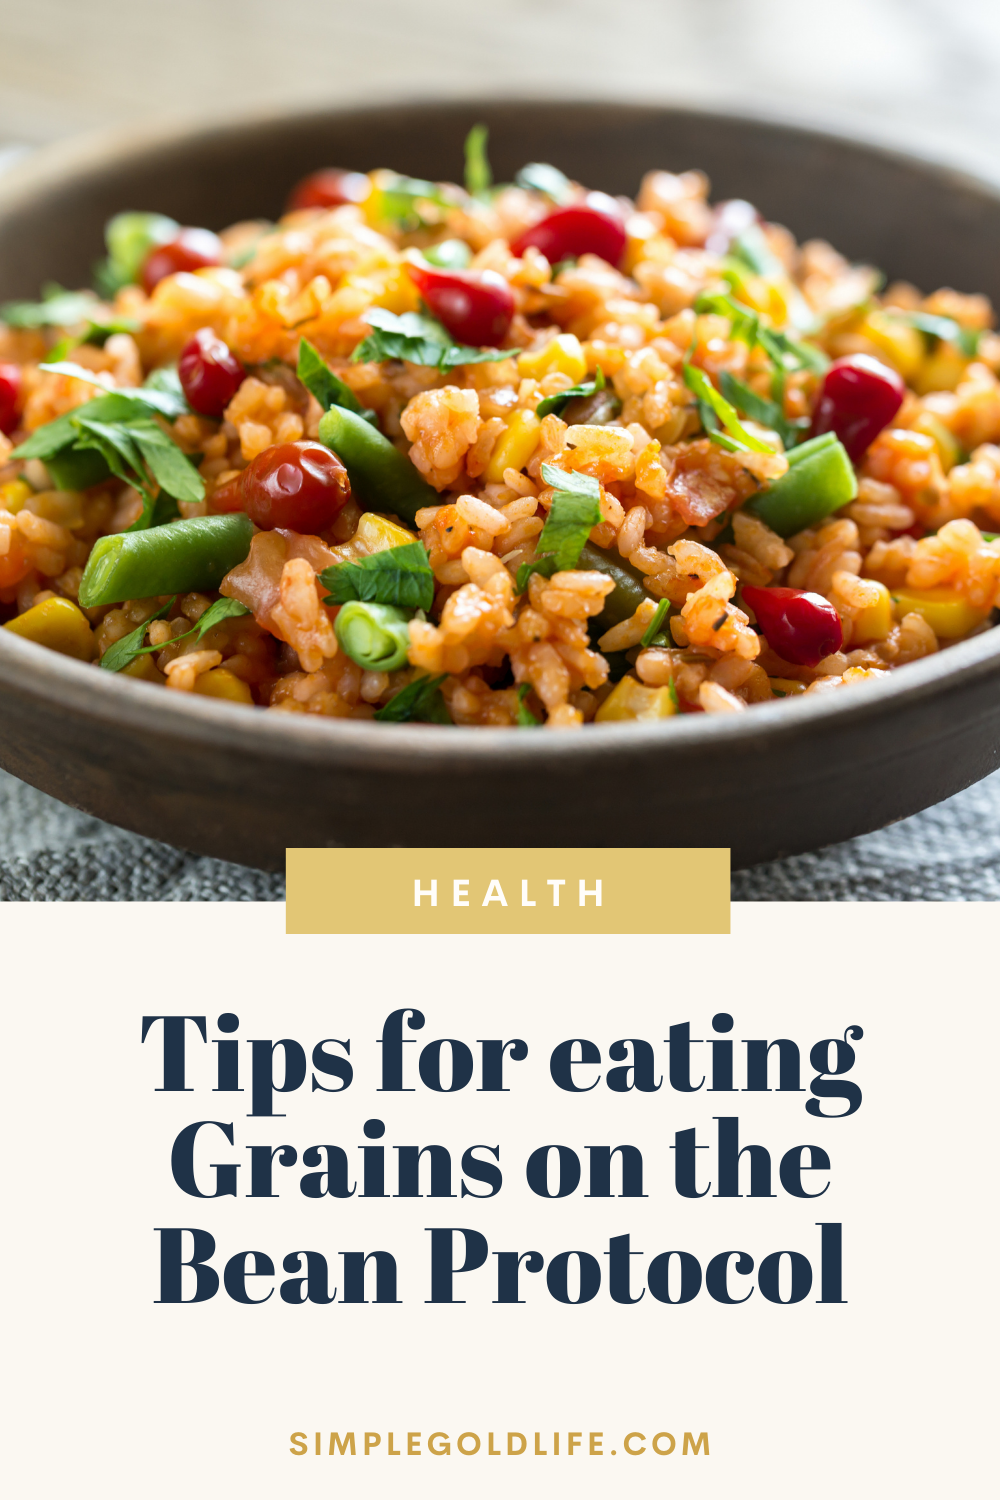 Benefits of grains on the Bean Protocol 2.png